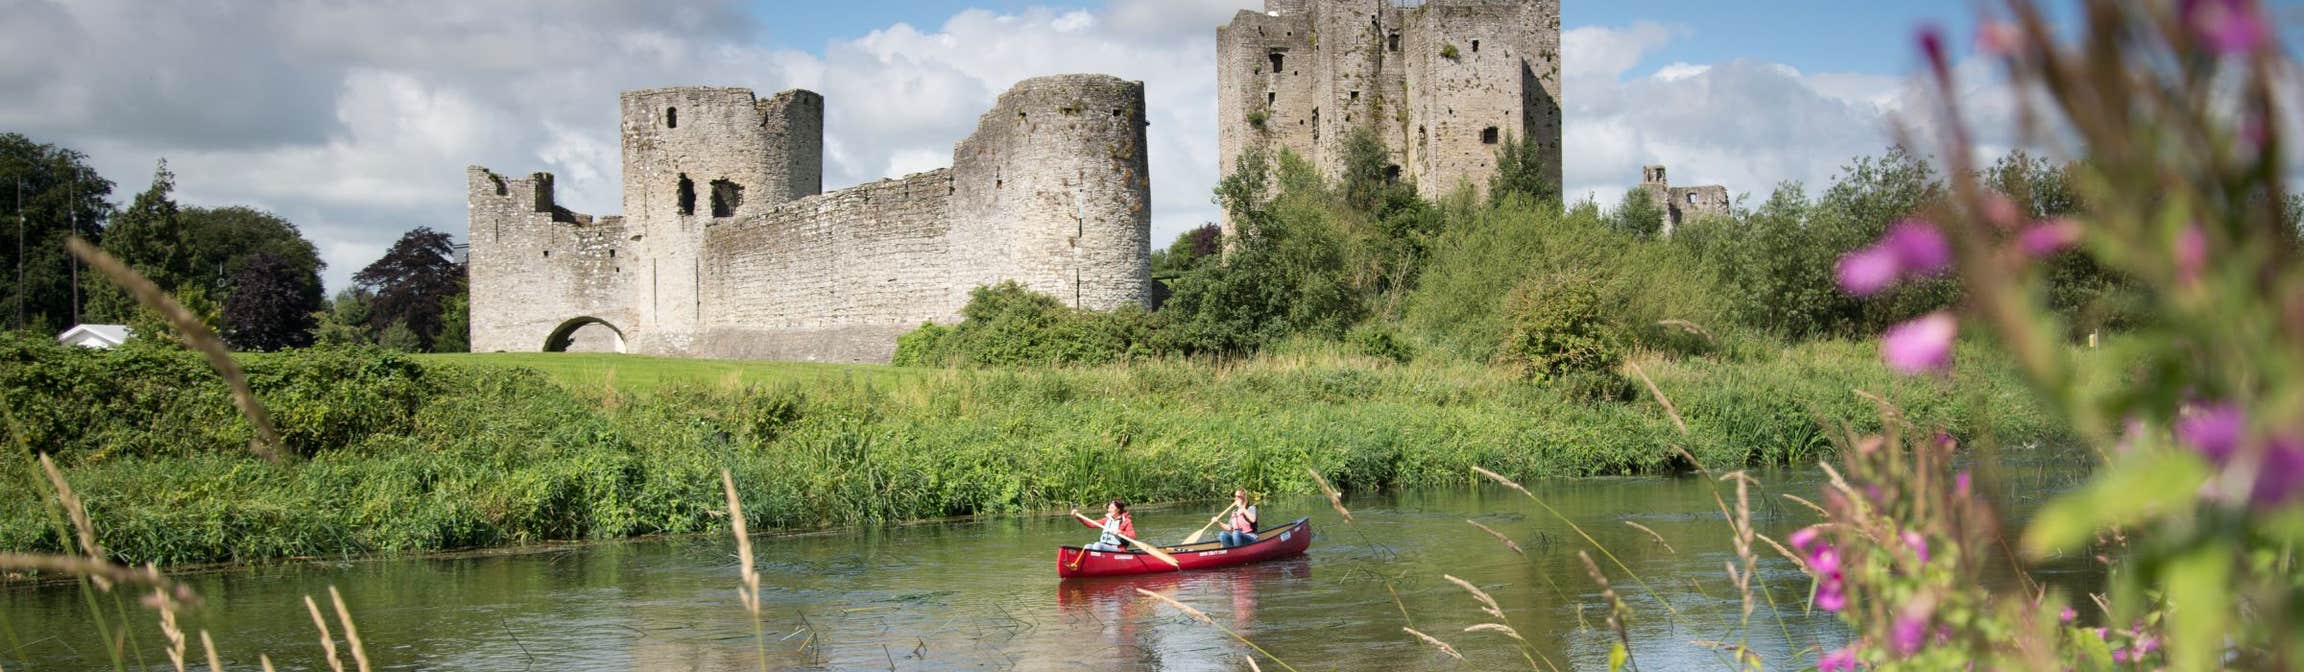 Two people in a rowing boat with views of flowers and Trim Castle nearby